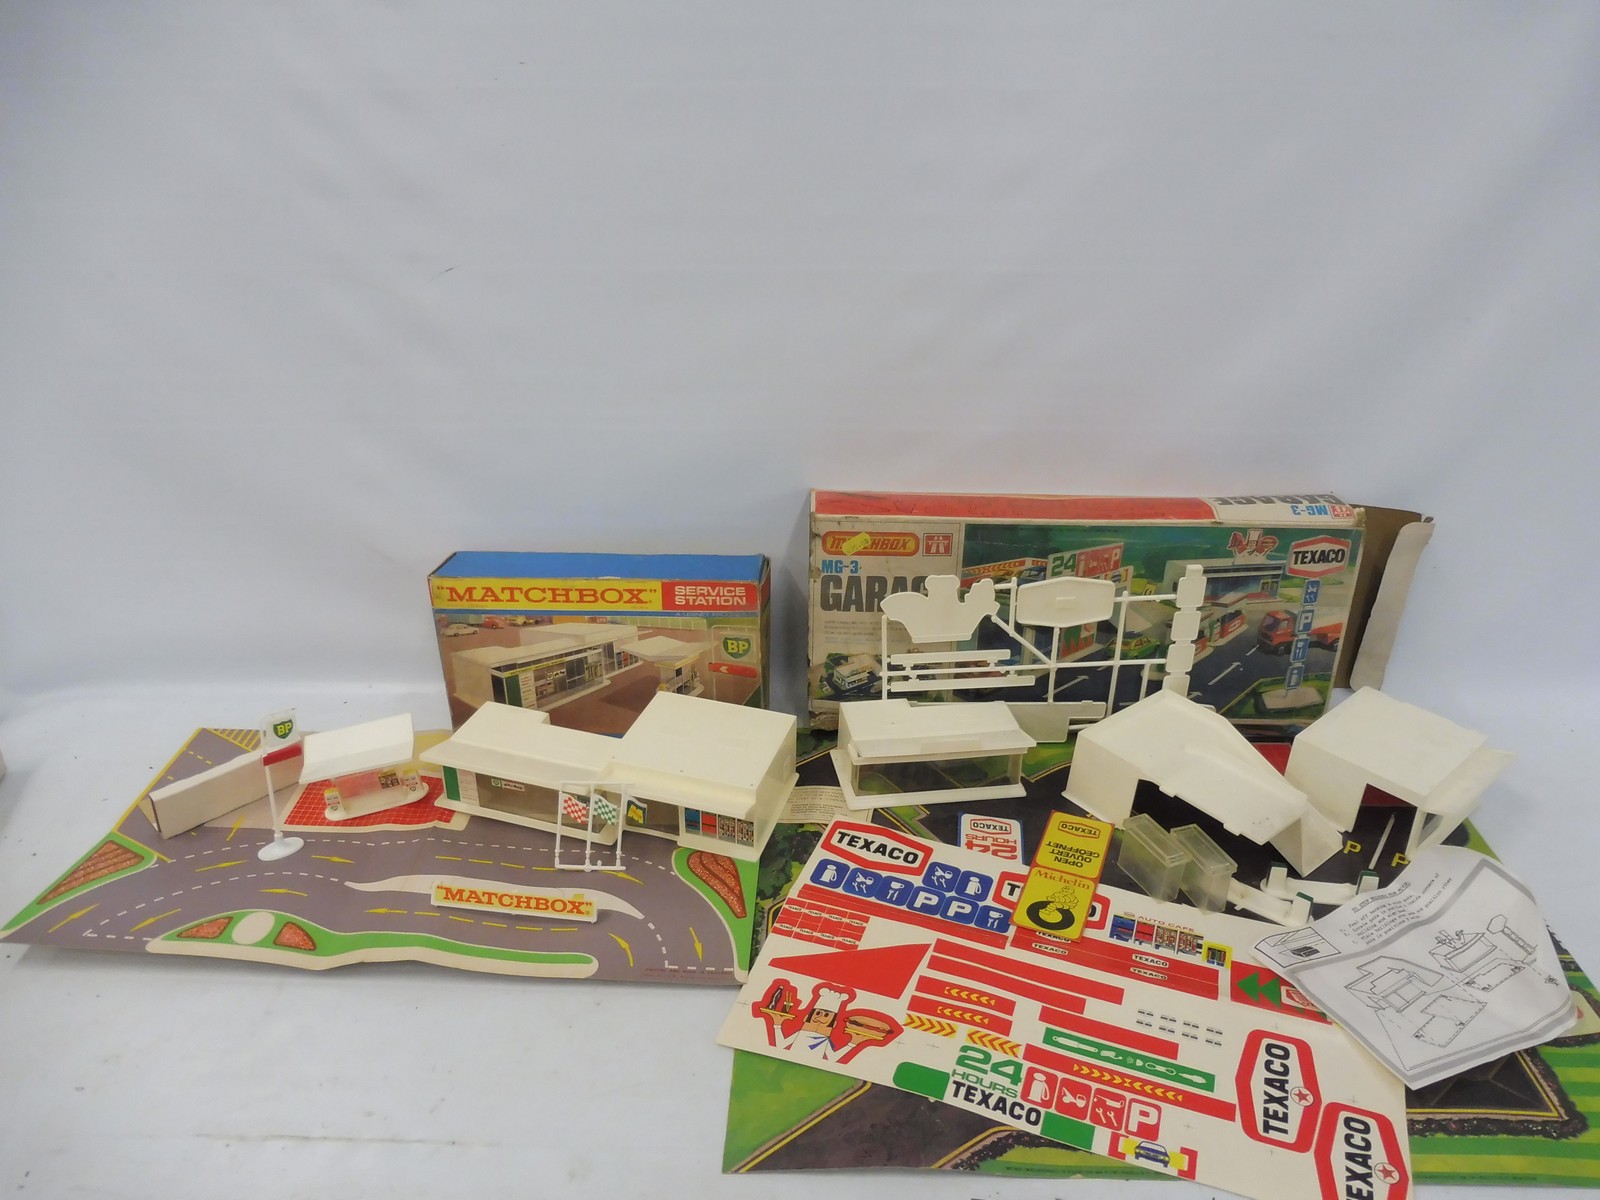 A boxed Matchbox Service Station, MG-1, by Lesney, with inner box and a Matchbox Garage, MG-3.